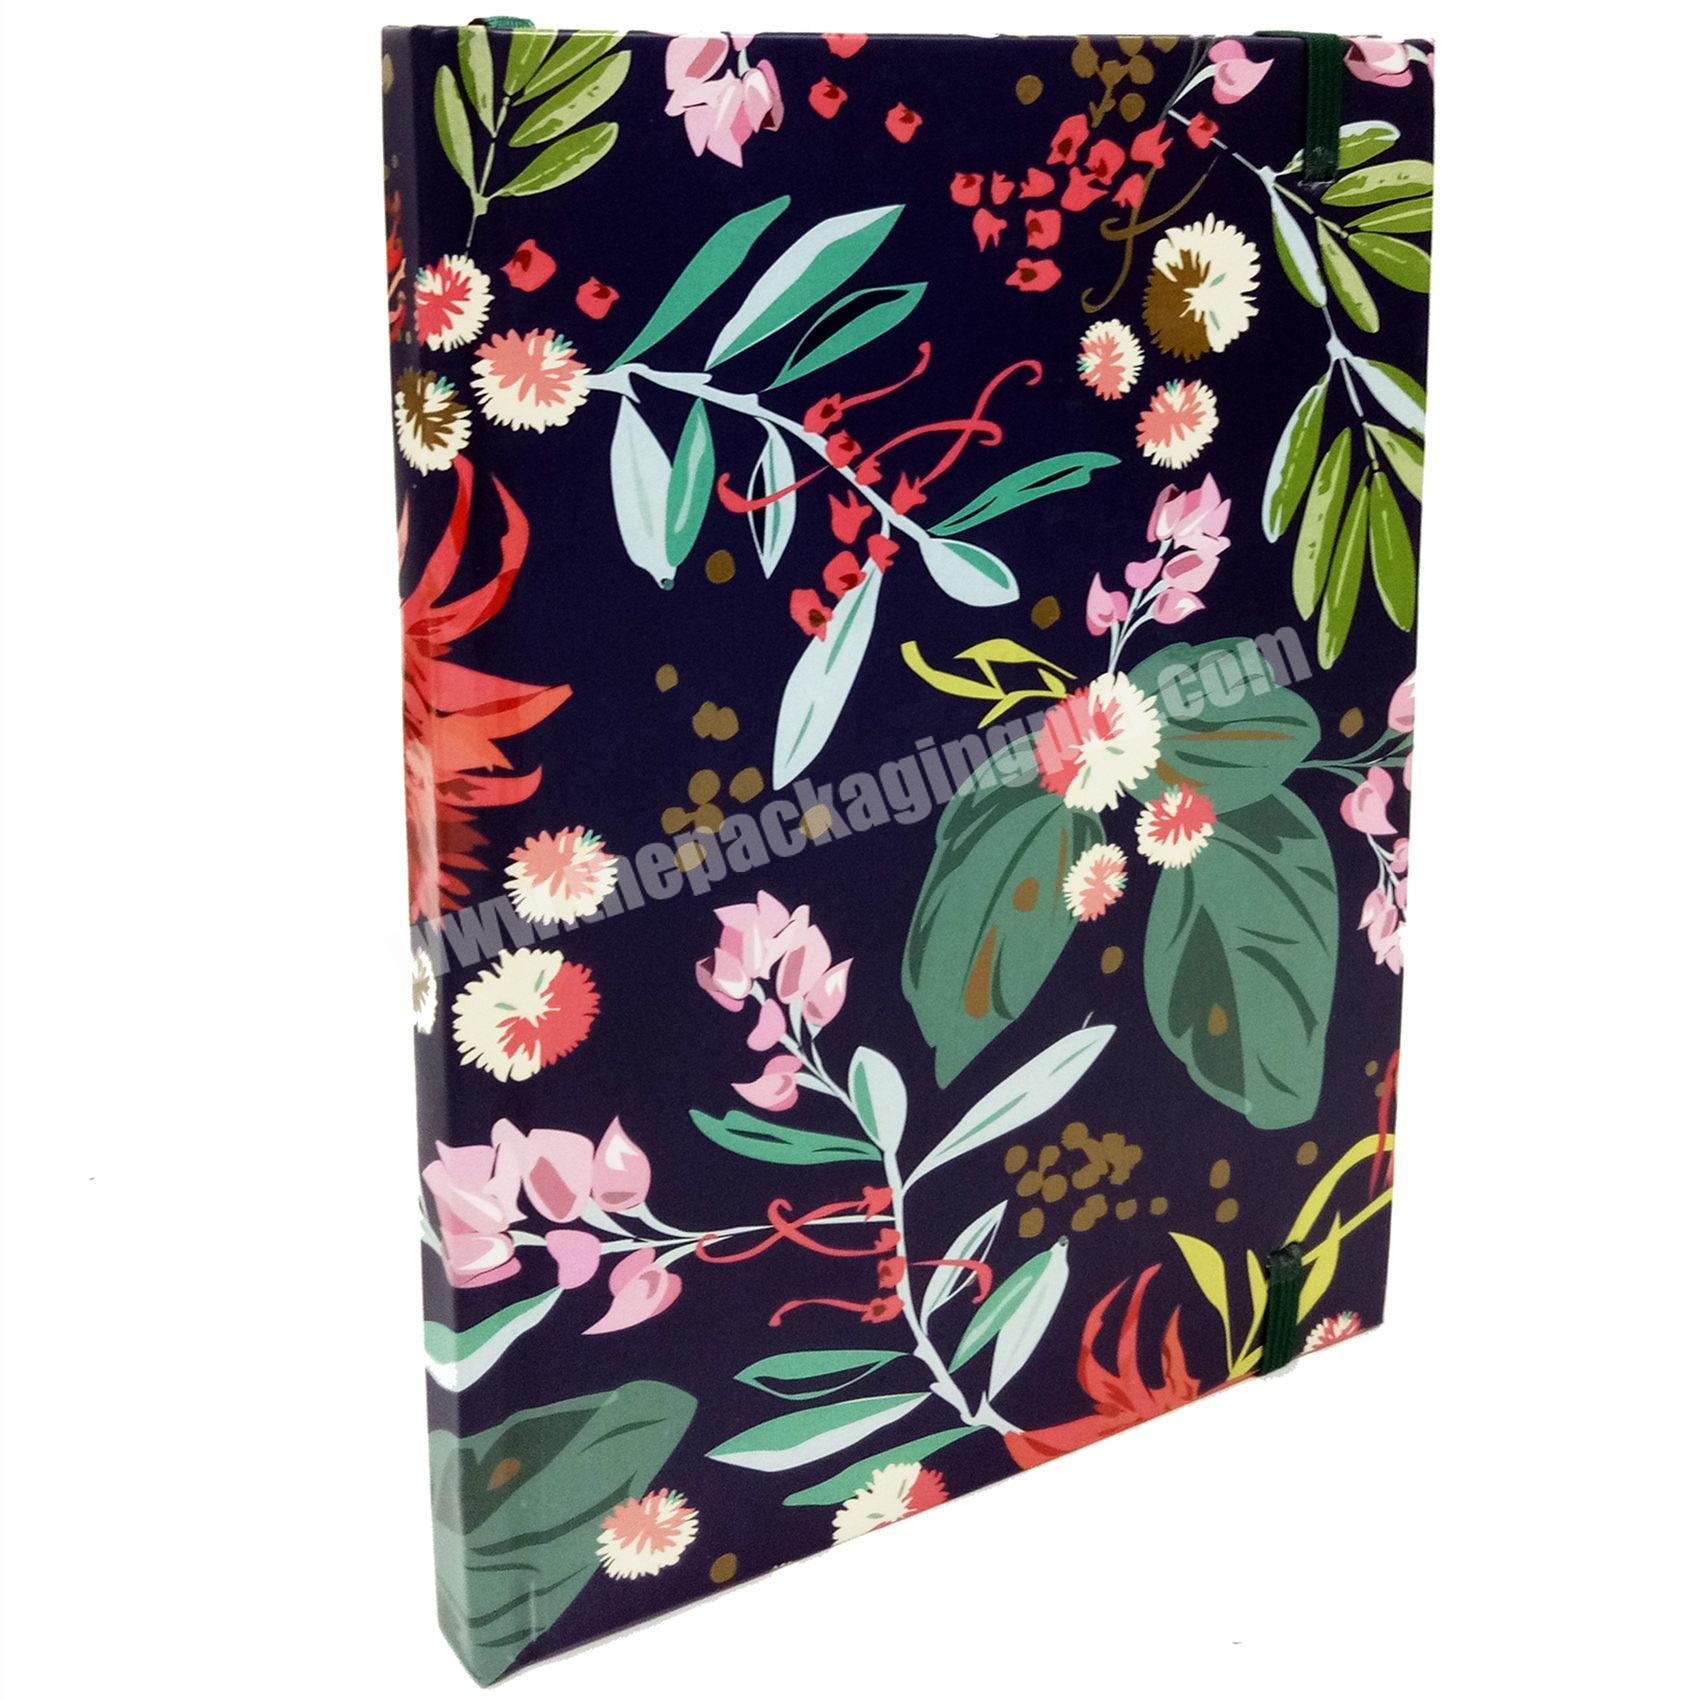 Best Selling Hard Cover UV Spot Notebook Composition Writing Book Blank Page Diary